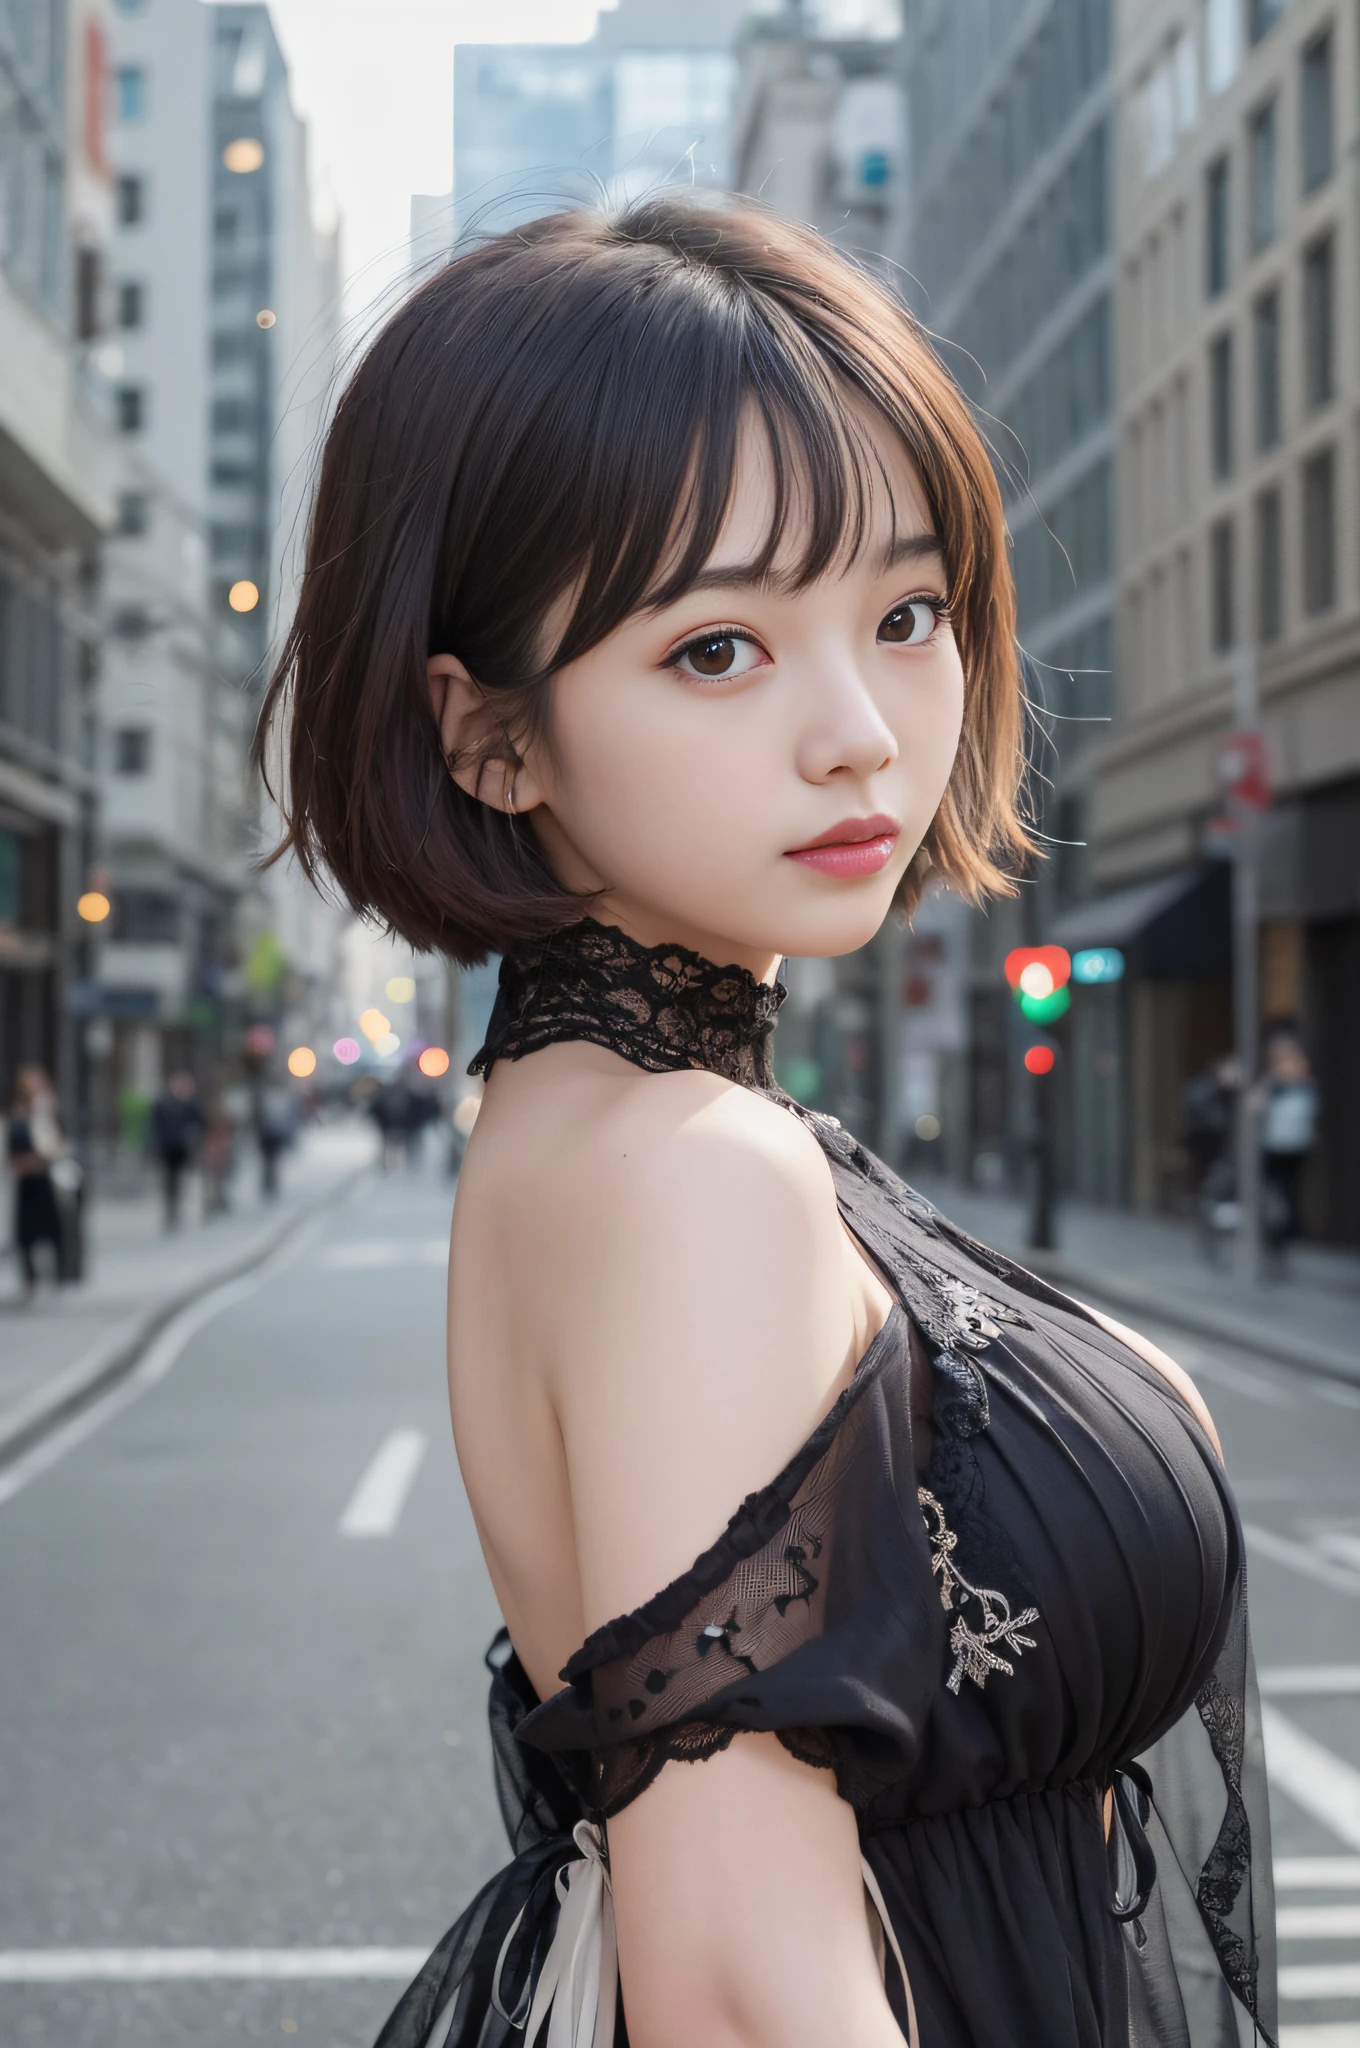 randome pose, mix4, (8K, Raw photography, top-quality, ​masterpiece: 1.45), (realisitic, Photorealsitic: 1.37), one girls, cute little, A smile、Cityscape, natta, profetional lighting, photon maping, Radio City, physically-based renderingt, Gradient black hair, white  hair, short  curly hair, a handsome, girl with, tiny chest、(Raw photography、top-quality)、(realisitic、Photorealsitic:1.3)、top-quality、​masterpiece、extremely delicate and beautiful、A highly detailed、nffsw、A sense of unity、2k wallpaper、magnificent、Beautiful in every detail、​masterpiece、Smile、top-quality、Highly detailed ticker Unity 8K wallpapers、huge filesize、Ultra-detail、hight resolution、ighly detailed、Female 1 Person、Slim body、D-cups、Black Dress、(brown haired)、looking at viewert、pureerosface_v1:0.8 Short Hair、Photos of the architectural district。Black Dress。Hair is black。cheeks are slightly pink。Transparent skin。A smile that makes you feel innocent。 Her eyes with、Illuminated by soft light。Her skin is shiny and shiny、Glossy、Glossy、Glossy、Glossy。Loose fluffy bob,Hair swaying in the wind makes her charm even more pronounced.。(makeups:0.4)、(fluffy black eyes:1.21)、Black eyes。dark brown hair、Social media and profile pages、Park Gyu-young, female actress from korea, Cute Korean Actress。top-quality、​masterpiece、extremely delicate and beautiful、ighly detailed、8K Picture Wallpaper、astonishing、finely detail、huge filesize、ighly detailed、hight resolution、extremely detailed eye and face、 Stunning detailed eyes、Facial light、(The best illustrations:1.1)、超A high resolution、(Photorealsitic:1.1)、(Photorealistic 1.2:1.1)、Realistic facial proportions、Slimed、A smile、(Irregular irregular skin defects、Vein、Wrinkled pores on the skin:1.2)、top quality photo, hight resolution, 1080P, (clearface), (Detailed face description), (Detailed hand description), (​masterpiece), lifelike, extreme light and shadows, dishevled hair, ​masterpiece, lush detail, (Fine facial features), (Highest Quality Photos), (​masterpiece), (finely eye), Look in front of you, Fine clavicle,